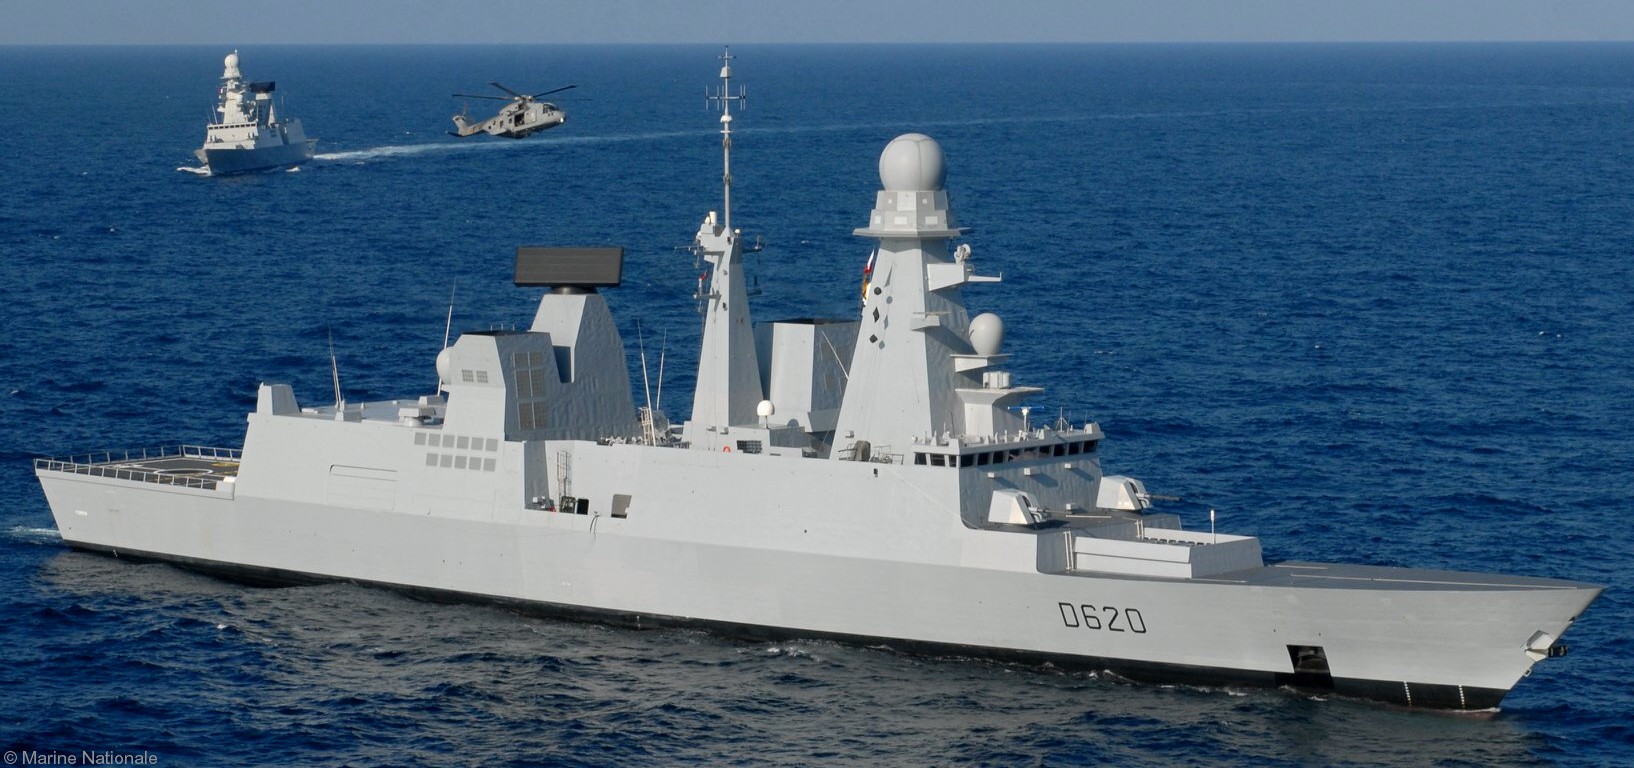 d-620 forbin class horizon guided missile air defense frigate french navy marine nationale 24x